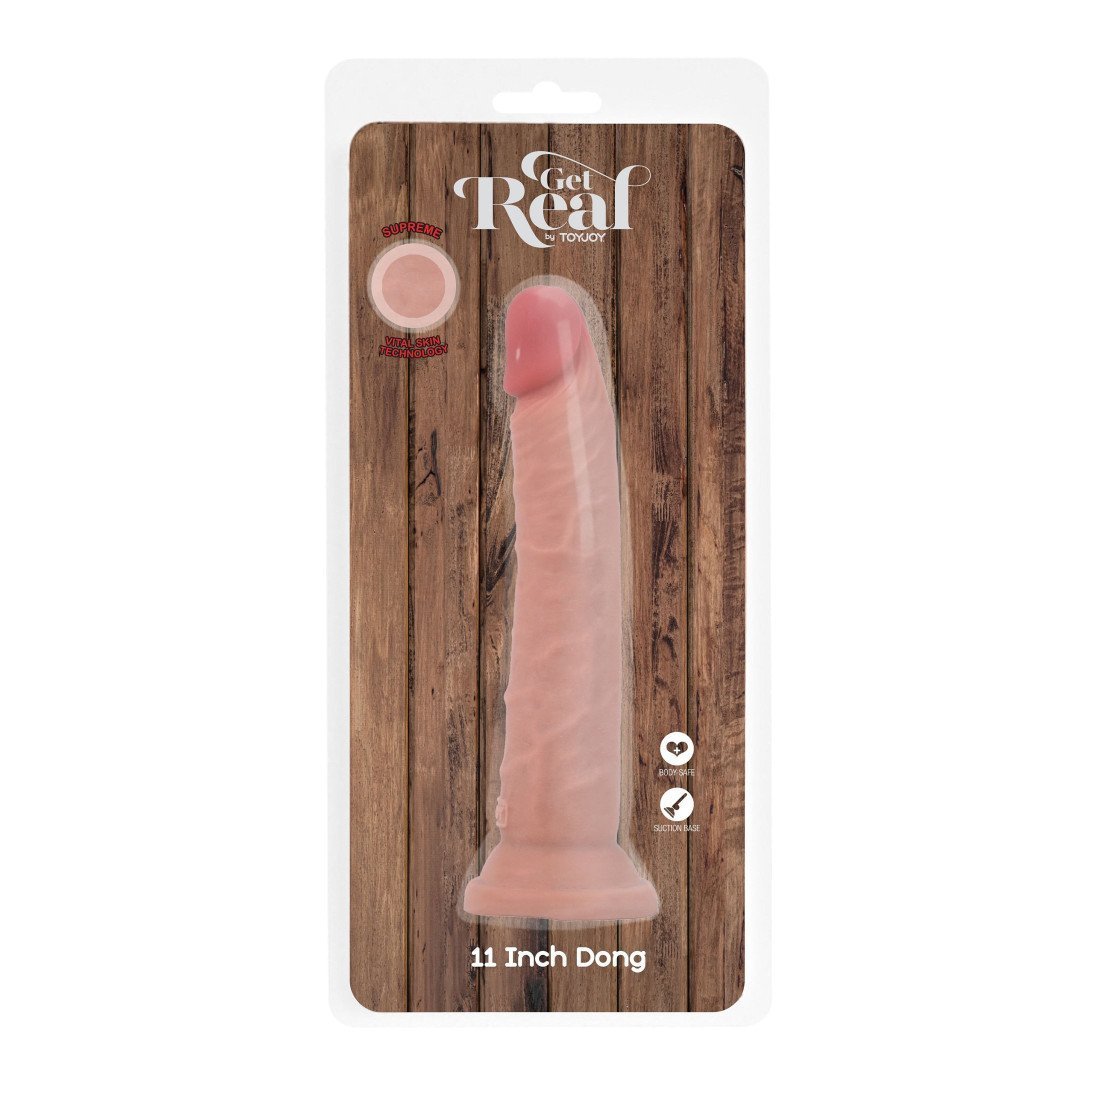 Dildo (pažeista pakuotė) „Deluxe Dual Density Dong 11Inch“ - Get Real